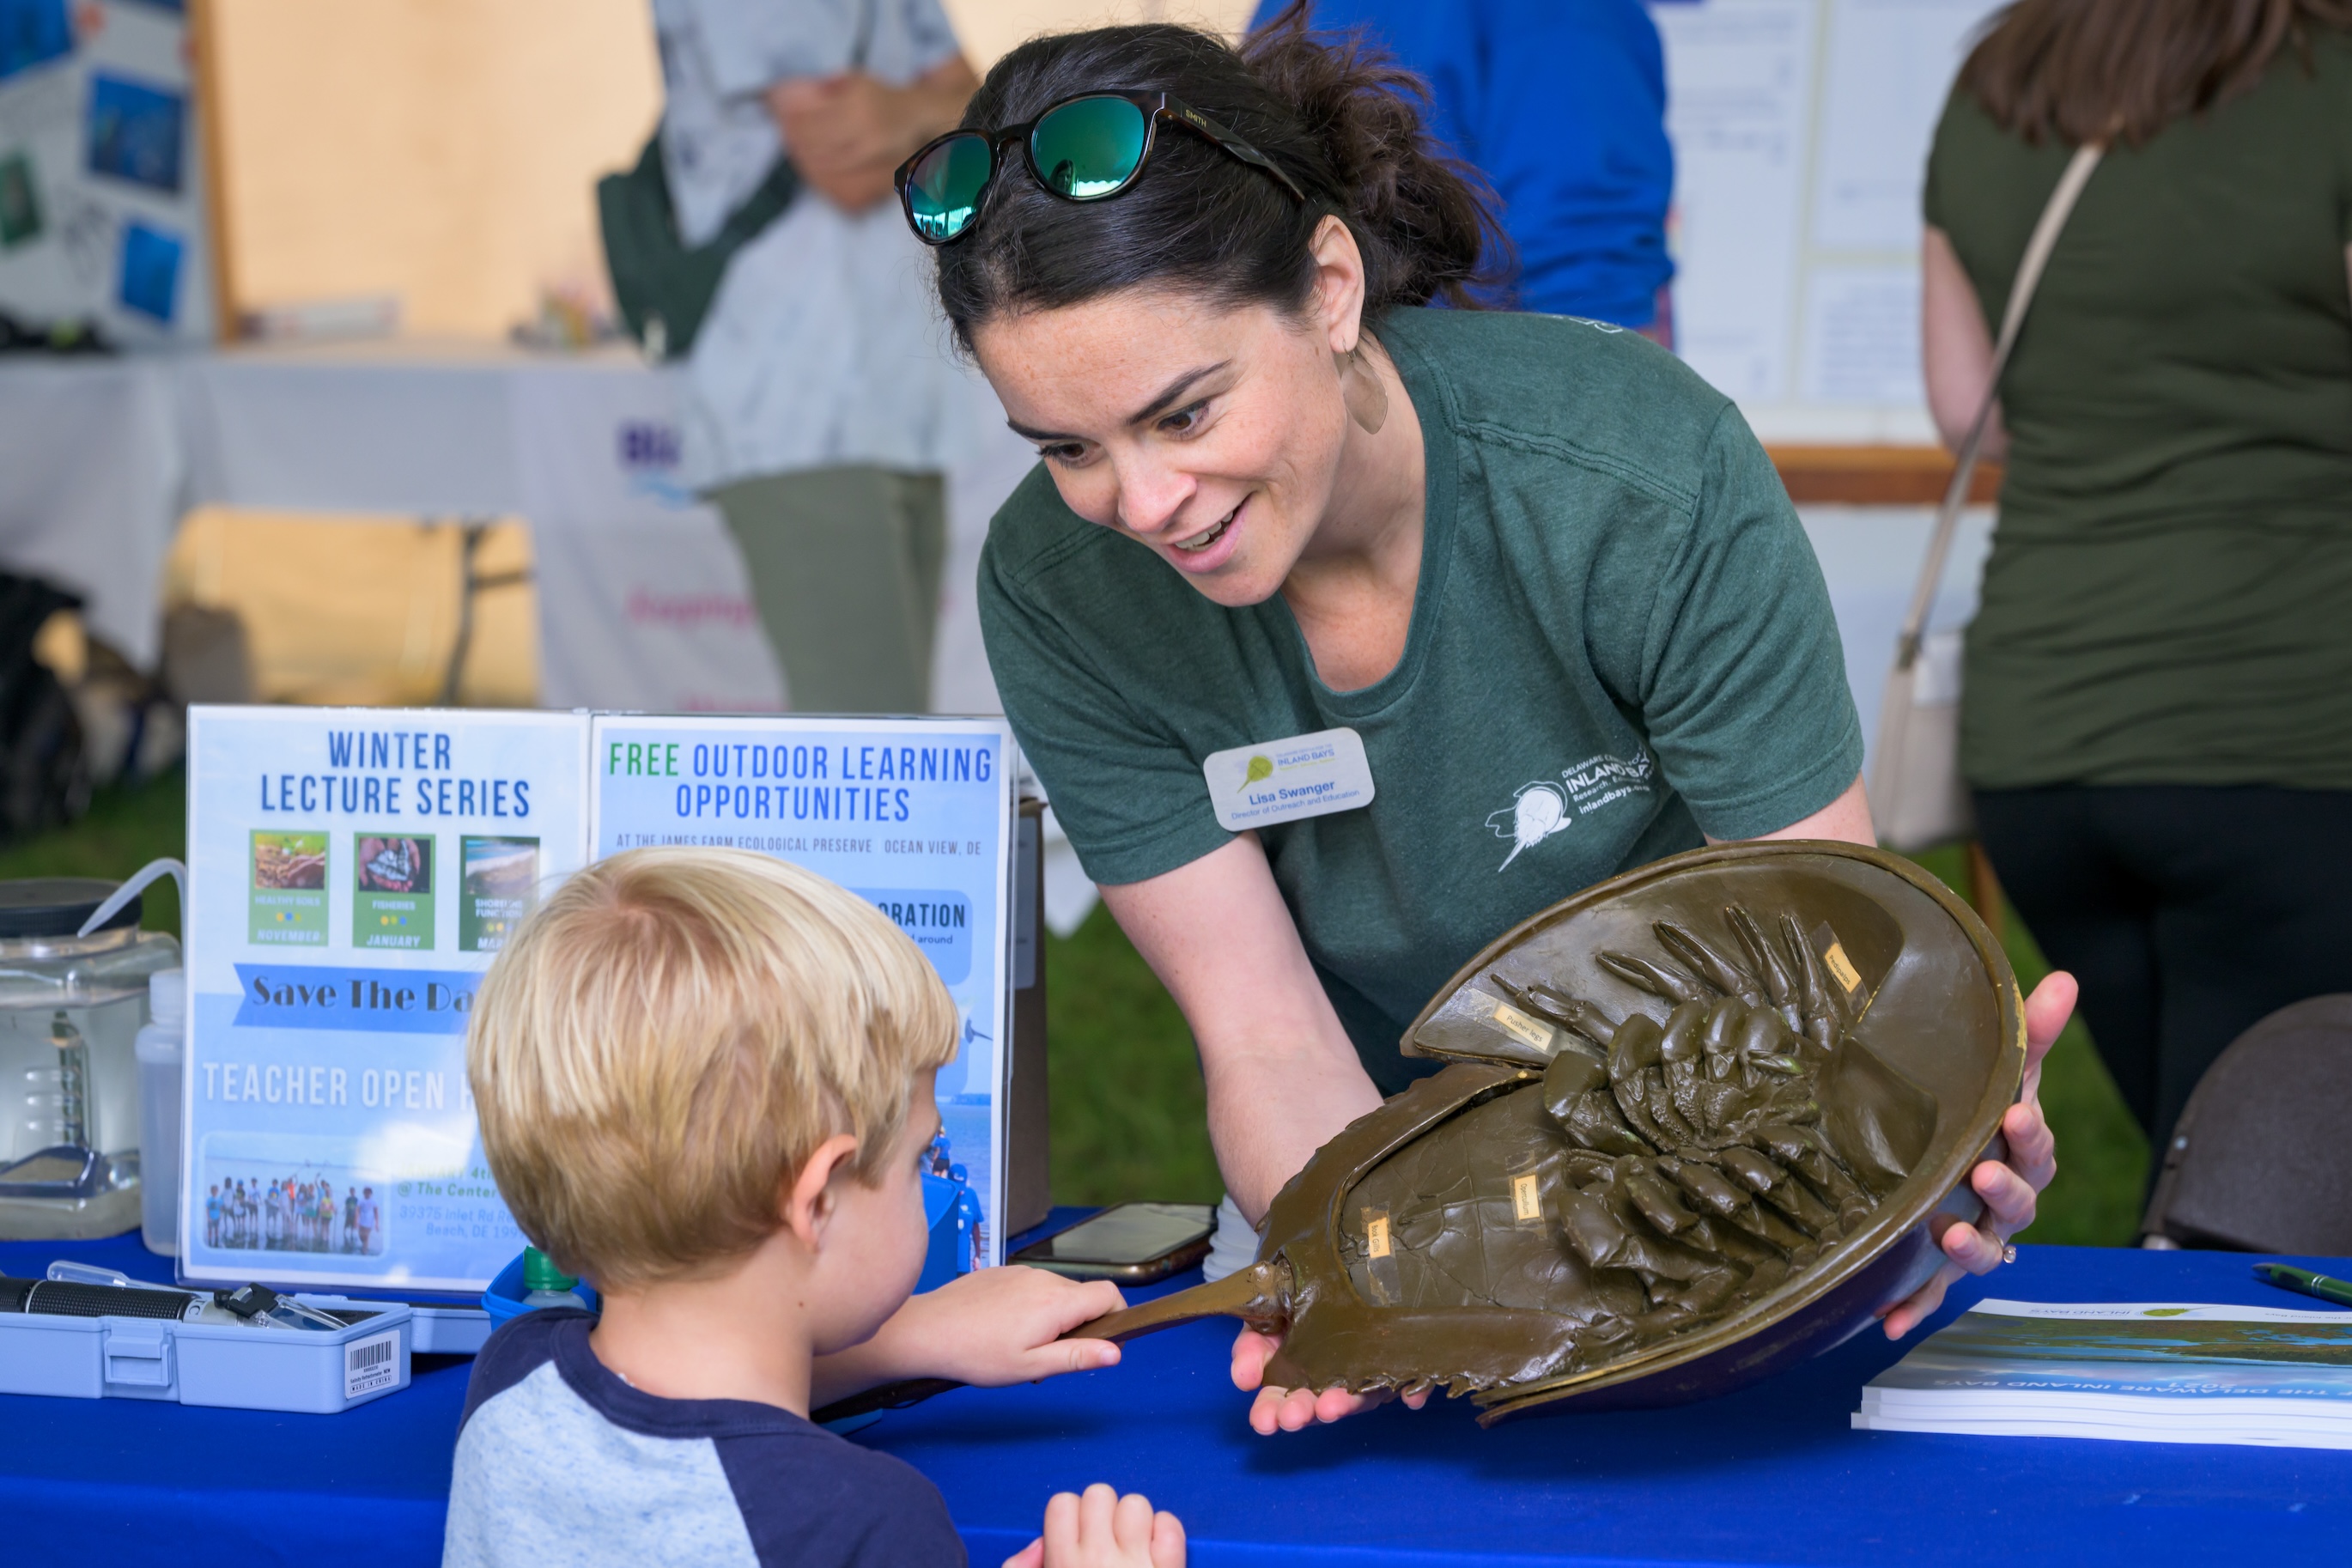 A woman demonstrates the anatomy of a horseshoe crab.